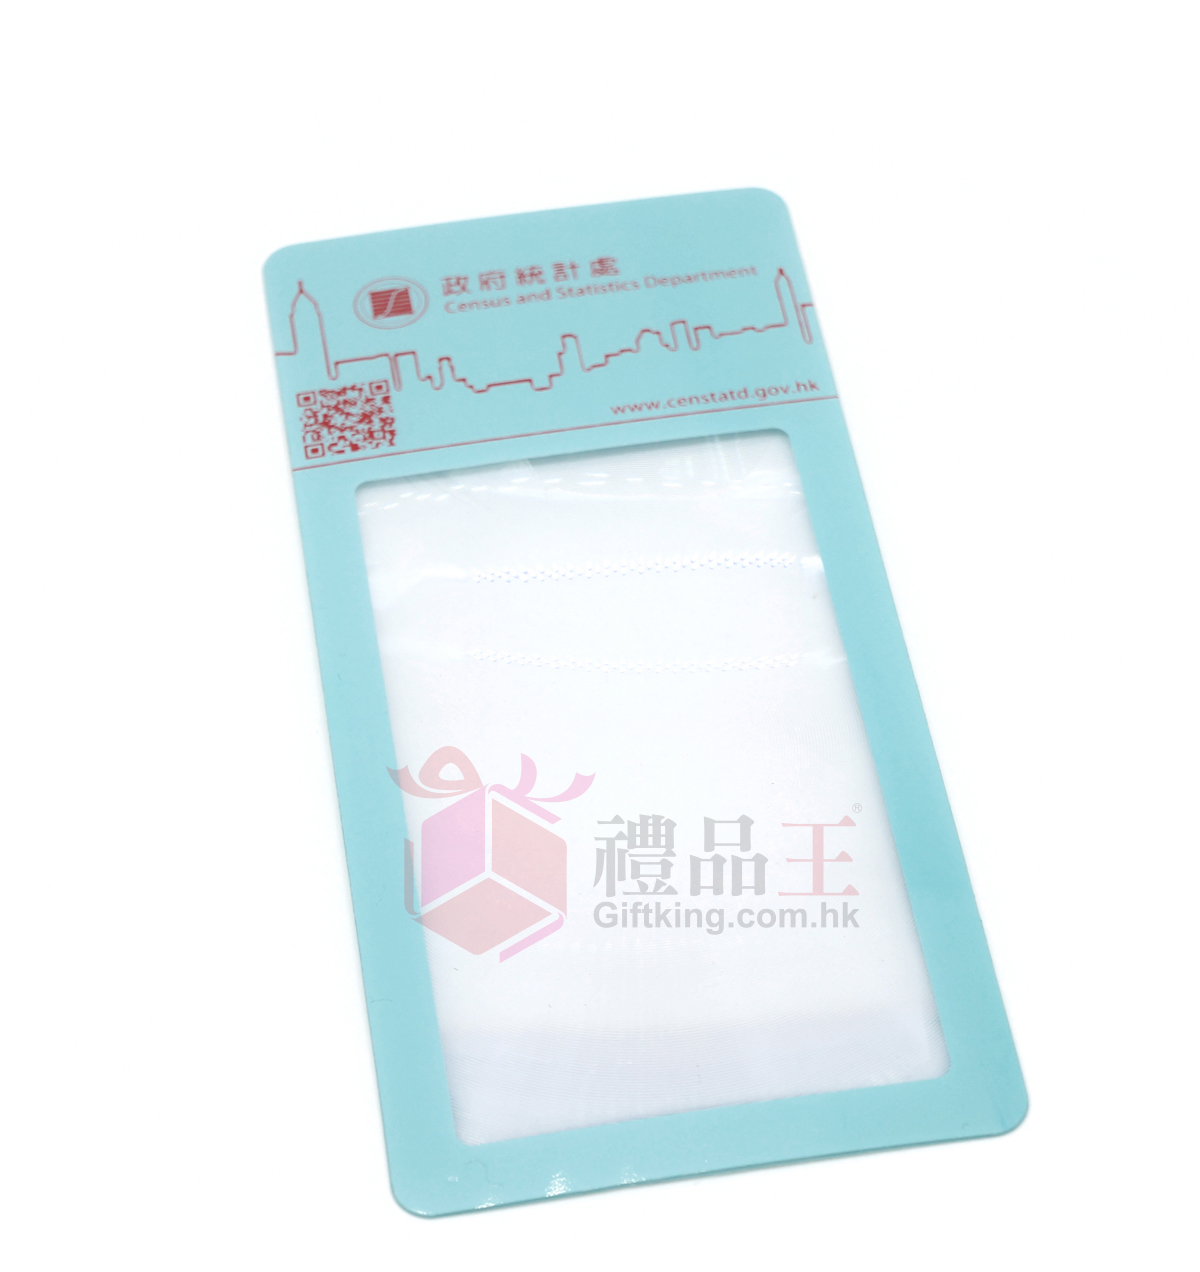 Census and Statistics Department Magnifying Glass Card (Stationery Gift)